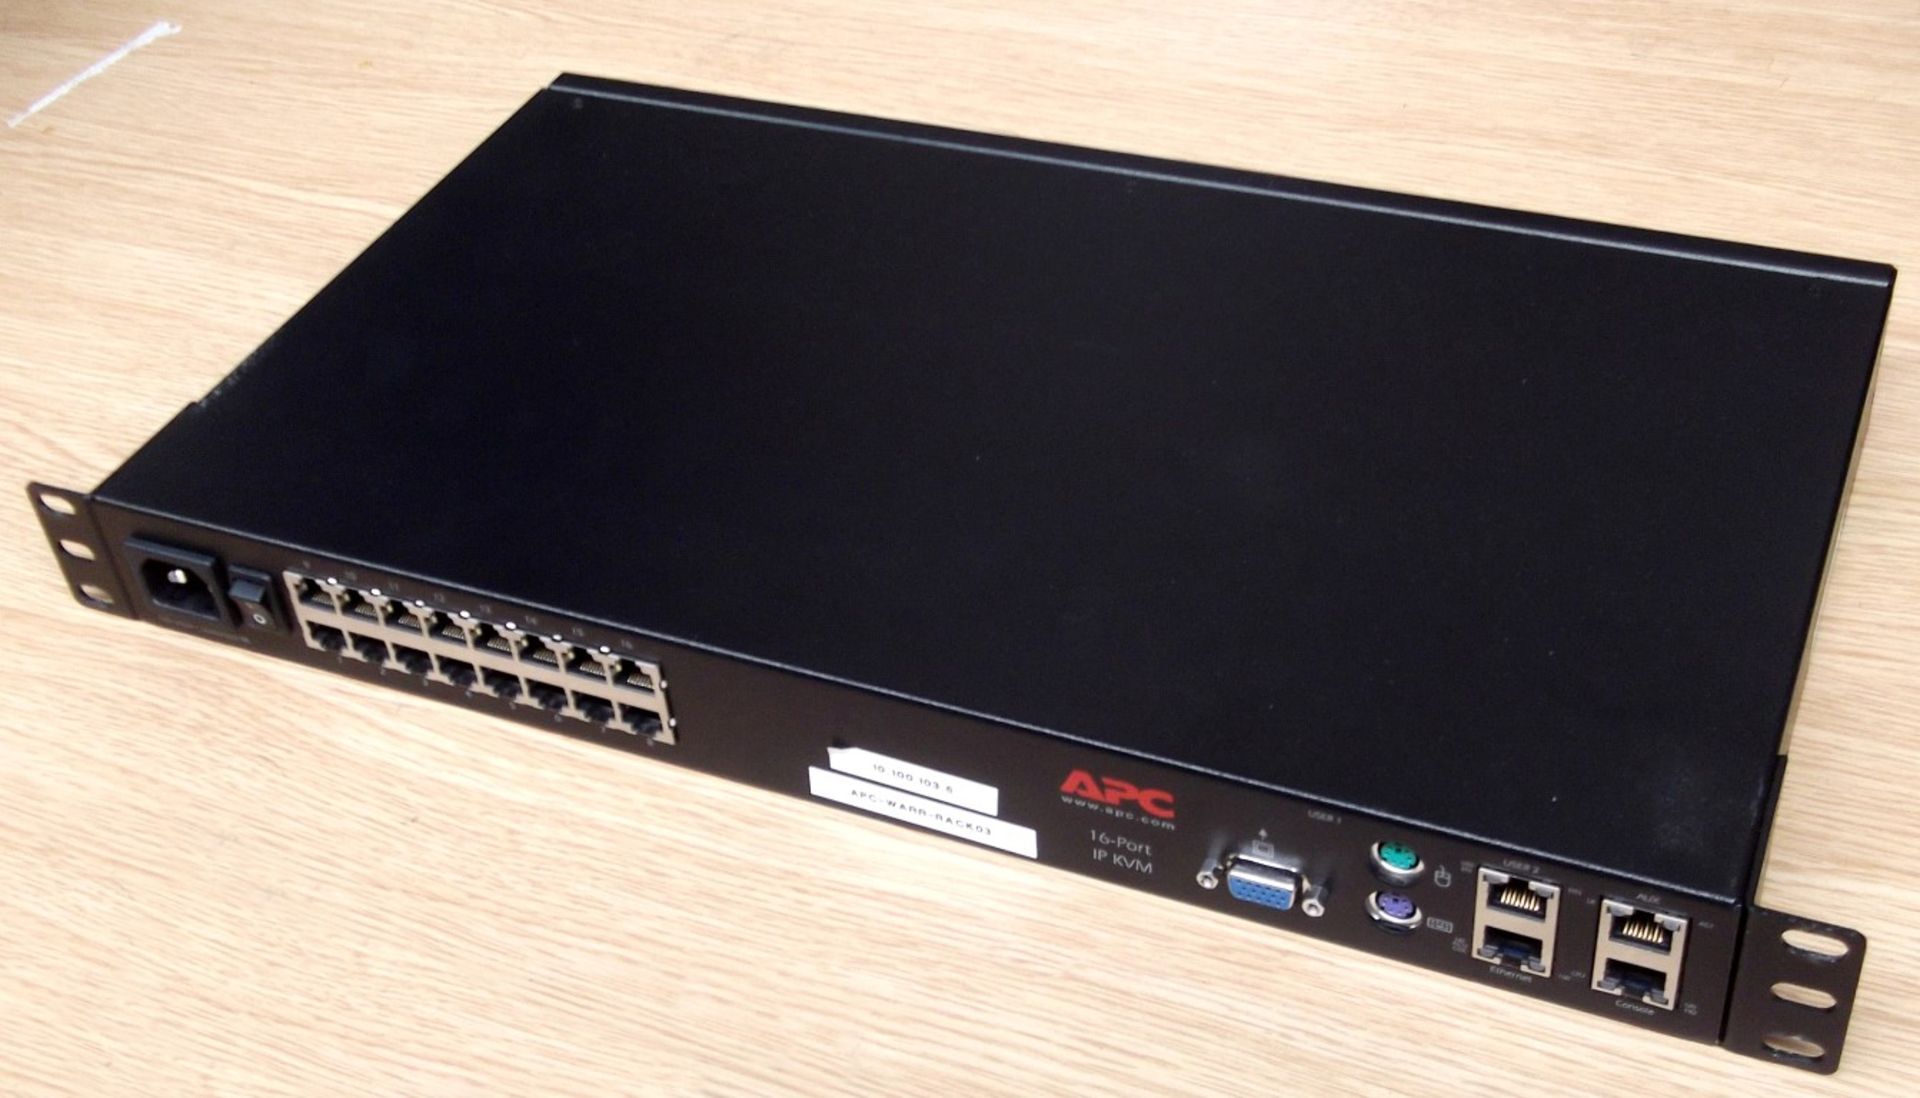 1 x APC 16-Port IP KVM - Recently Taken From A Working Office Environment - Ref NSB009 - CL106 - - Image 6 of 6